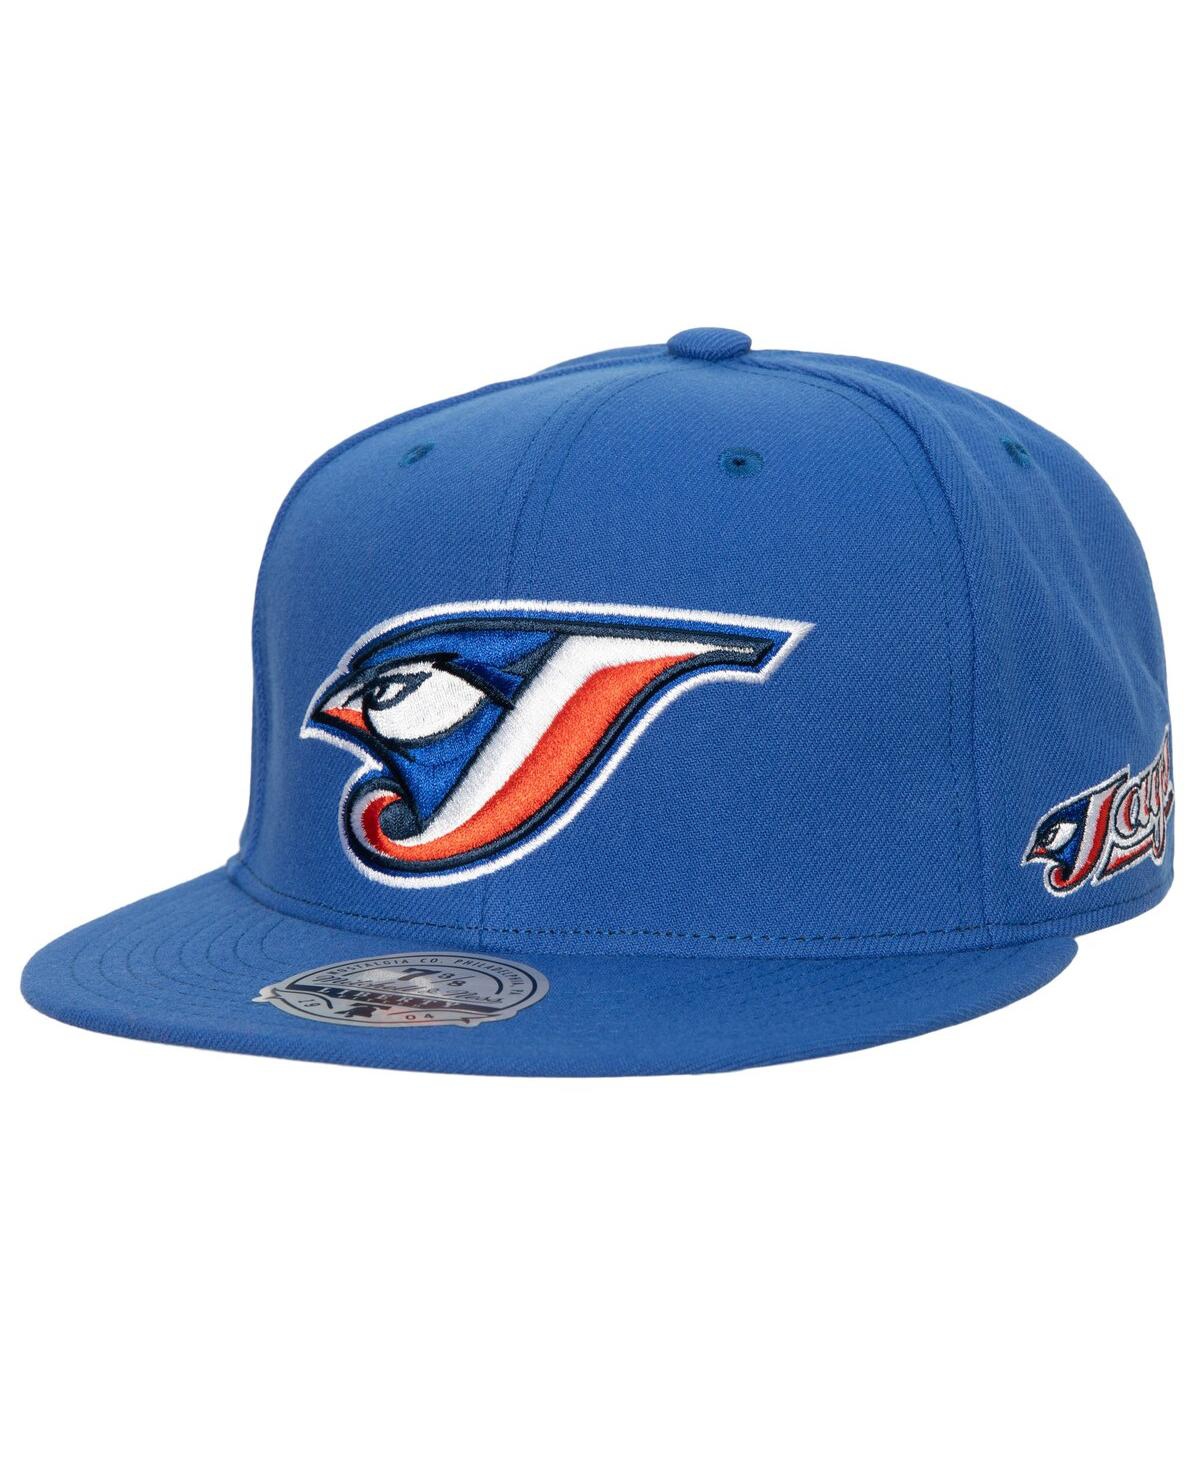 Shop Mitchell & Ness Men's  Royal Toronto Blue Jays Bases Loaded Fitted Hat